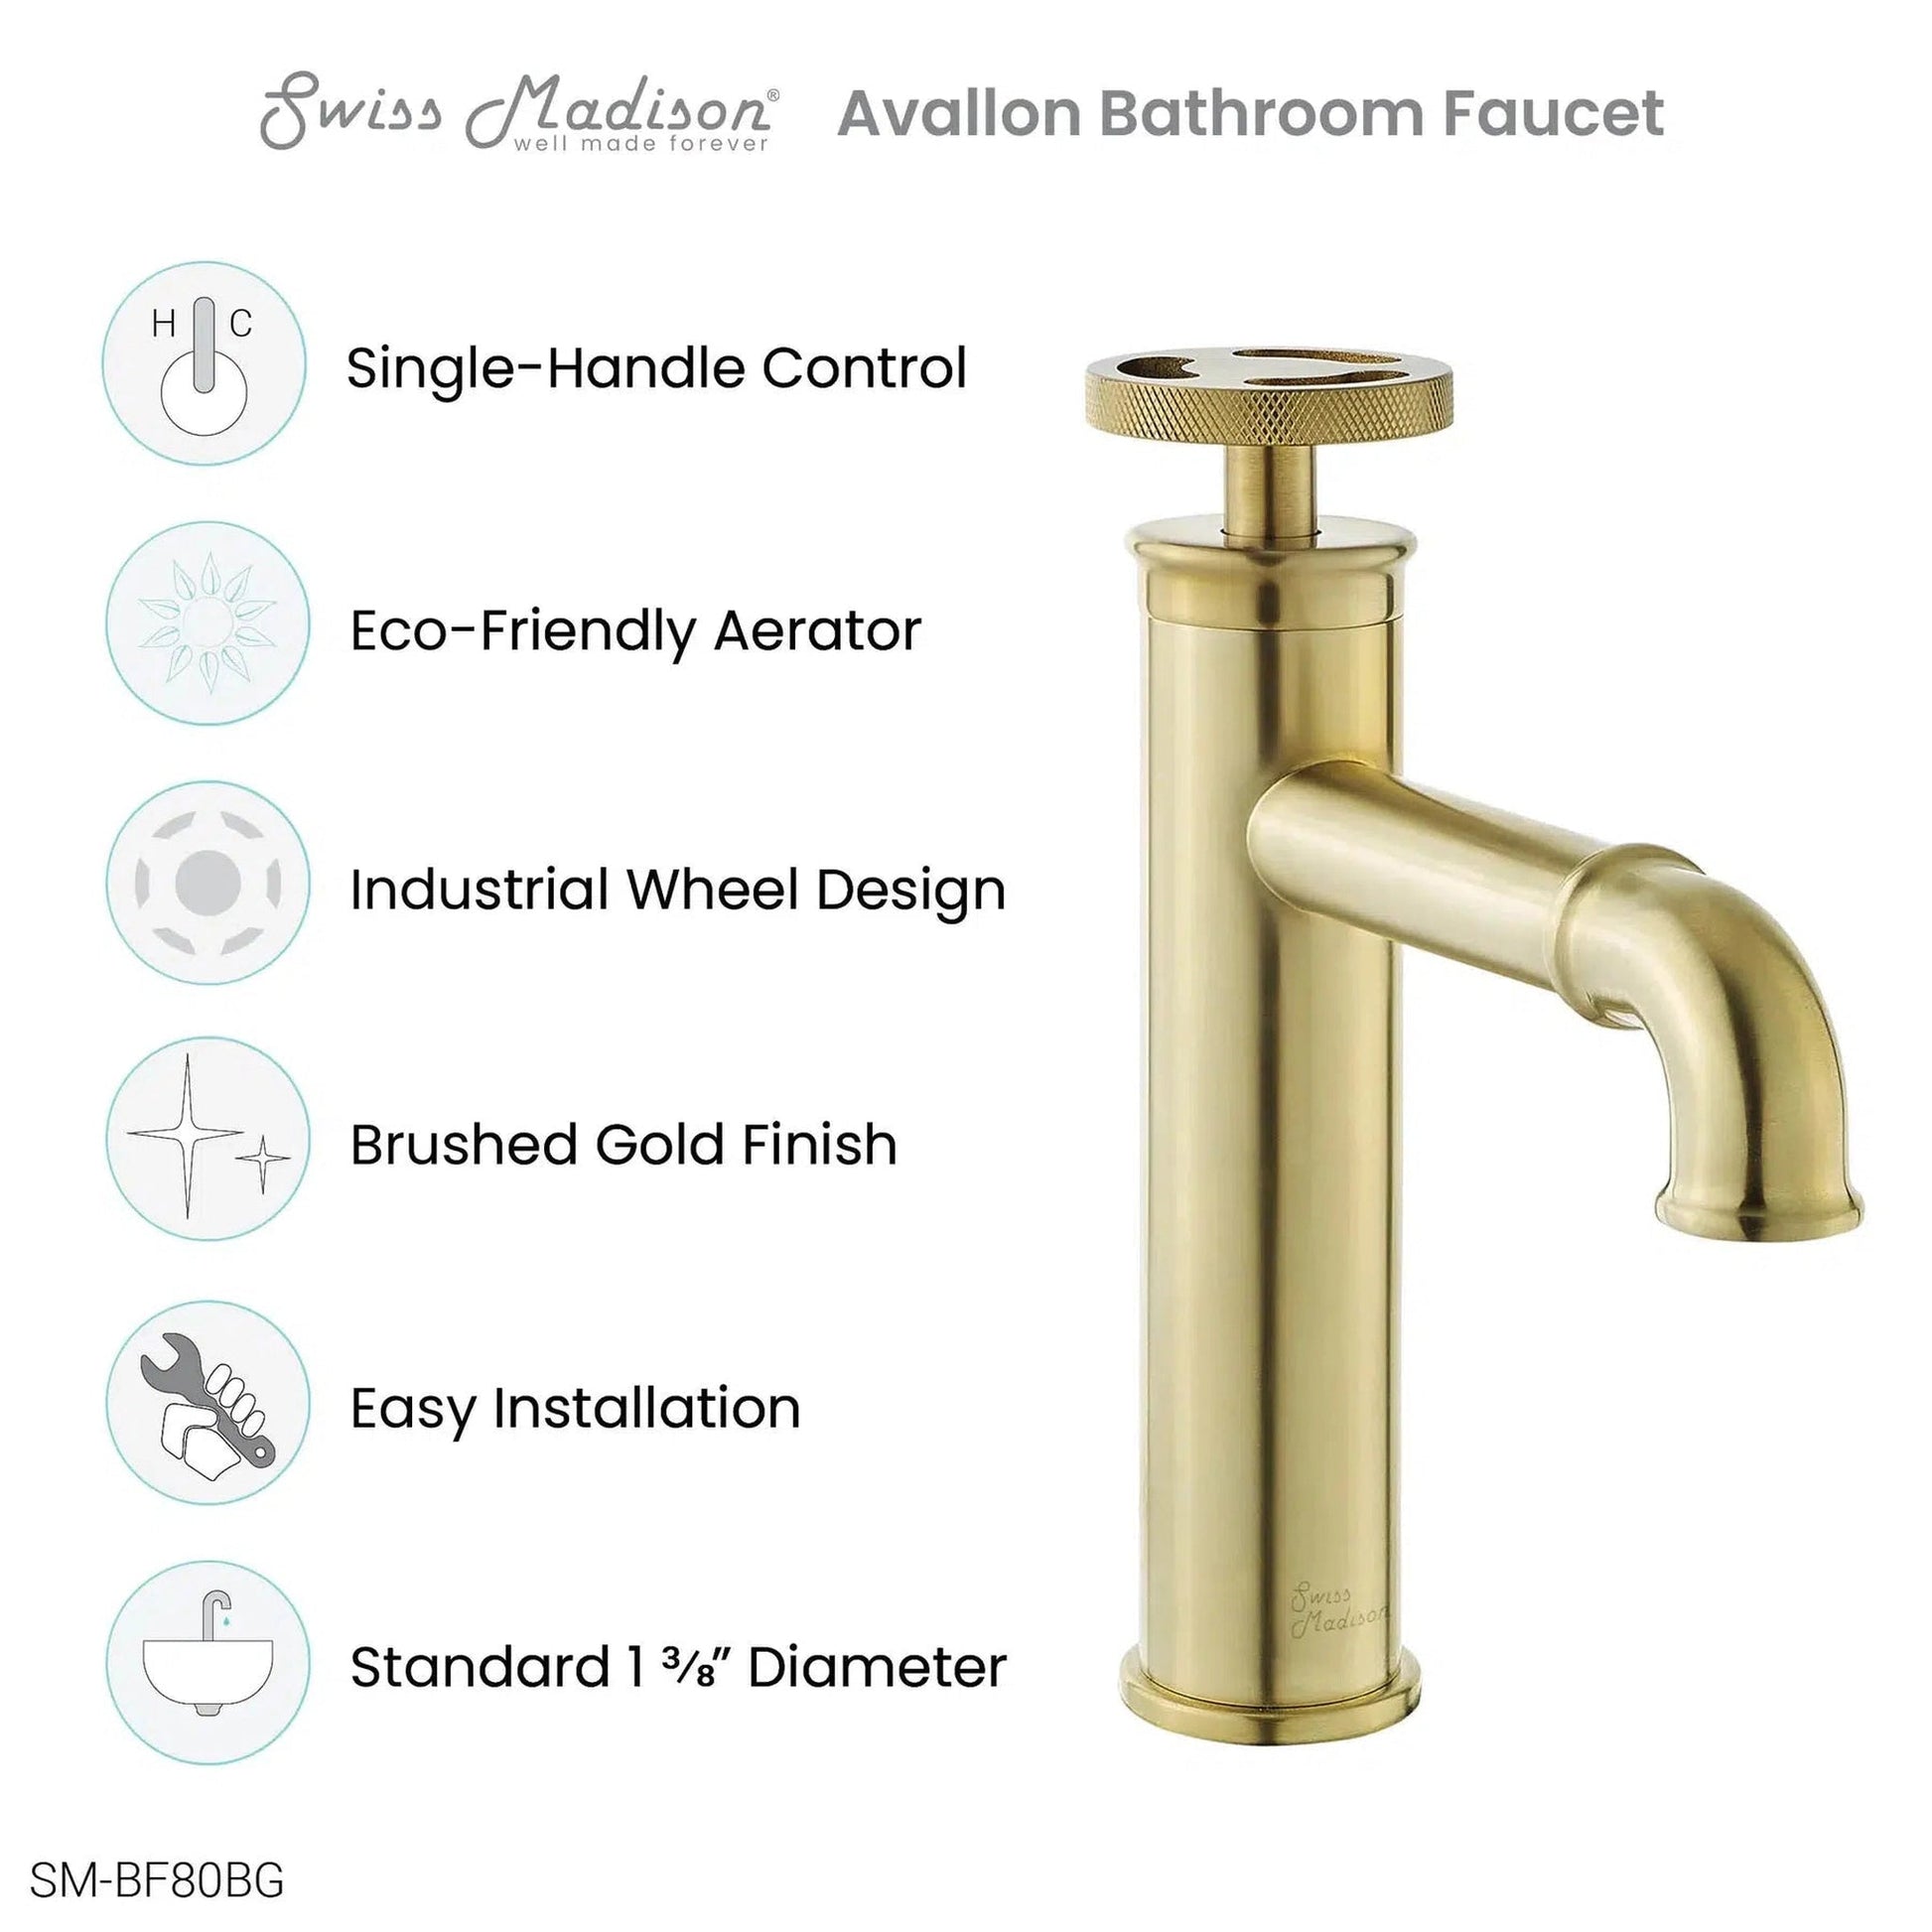 Swiss Madison Avallon 7" Single-Handle Brushed Gold Bathroom Faucet With 1.2 GPM Flow Rate